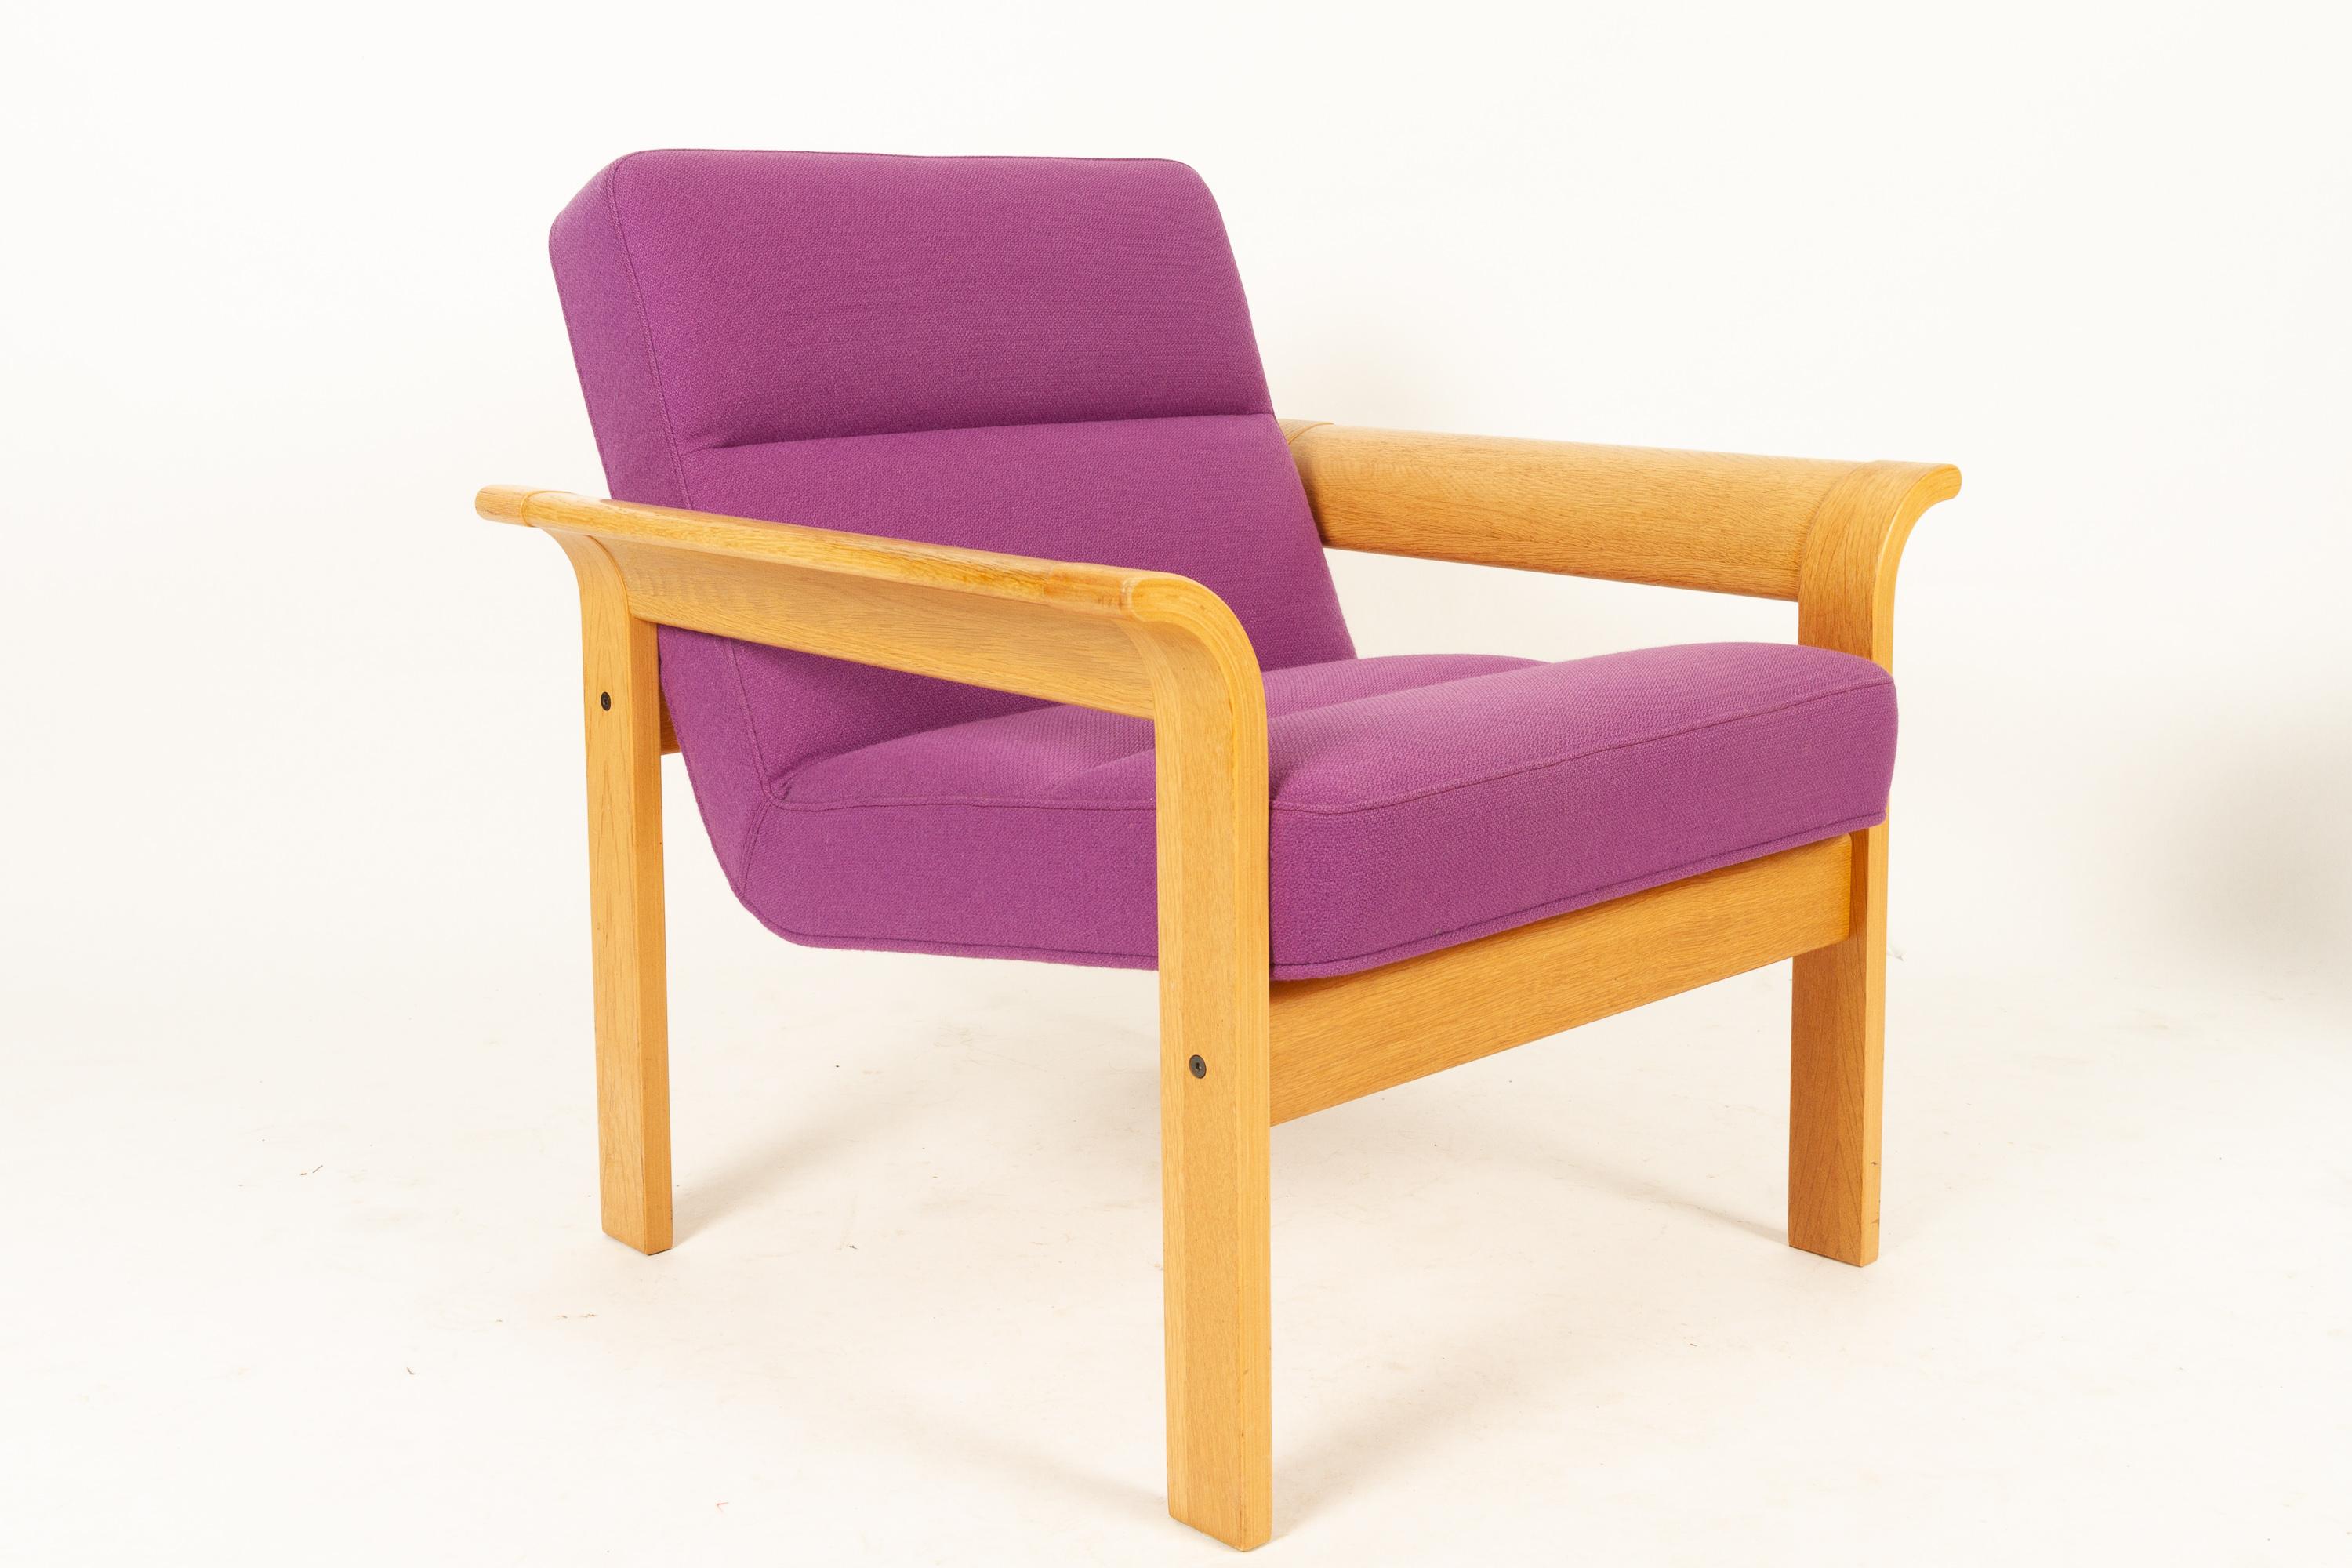 Danish oak lounge chairs and ottoman by Thygesen & Sørensen for Magnus Olesen.
Designed by Danish architects Rud Thygesen and Johnny Sørensen in the 1970s.
Beautiful set of Danish lounge chairs with matching ottoman in original heather colored